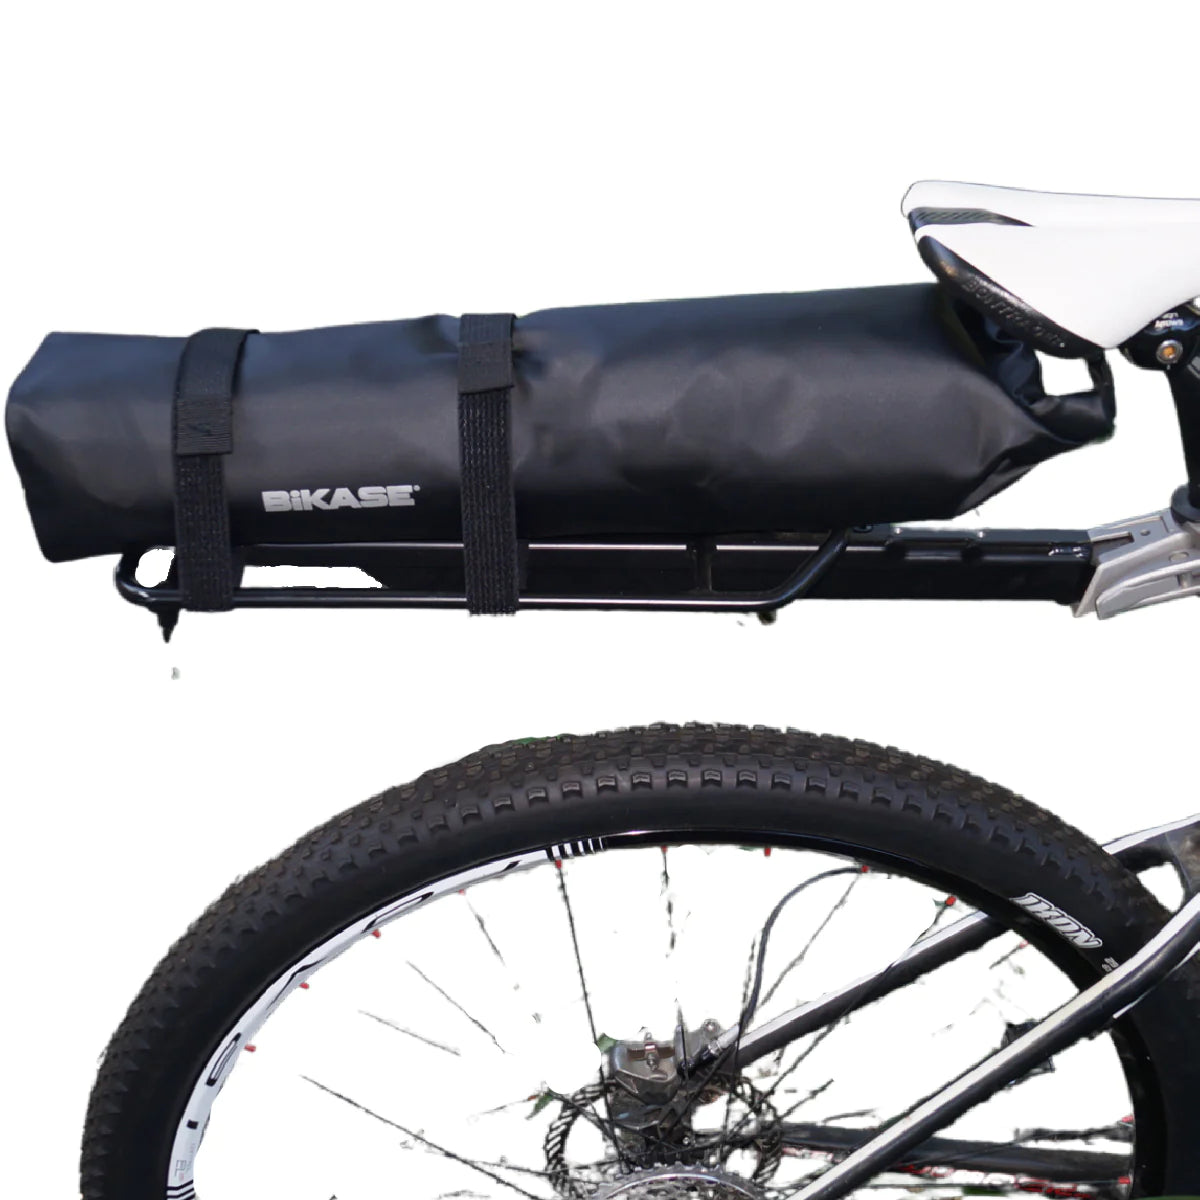 Ebike Battery Bag - Waterproof and flame resistant (Size Small)